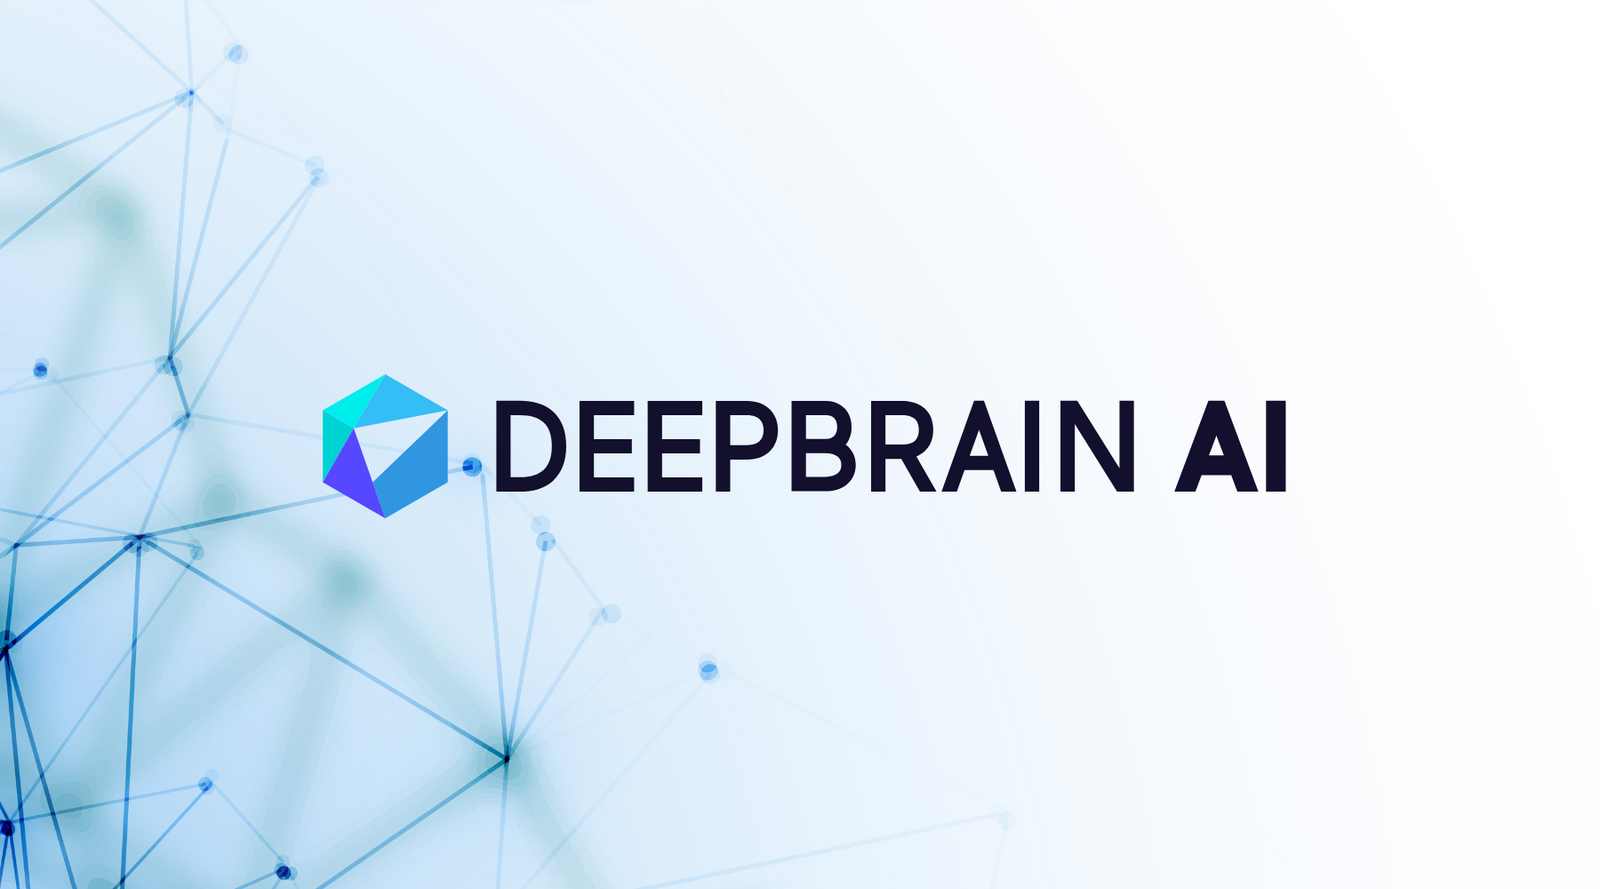 Harness the Power of AI: How DeepBrain AI Can Revolutionize Your Business